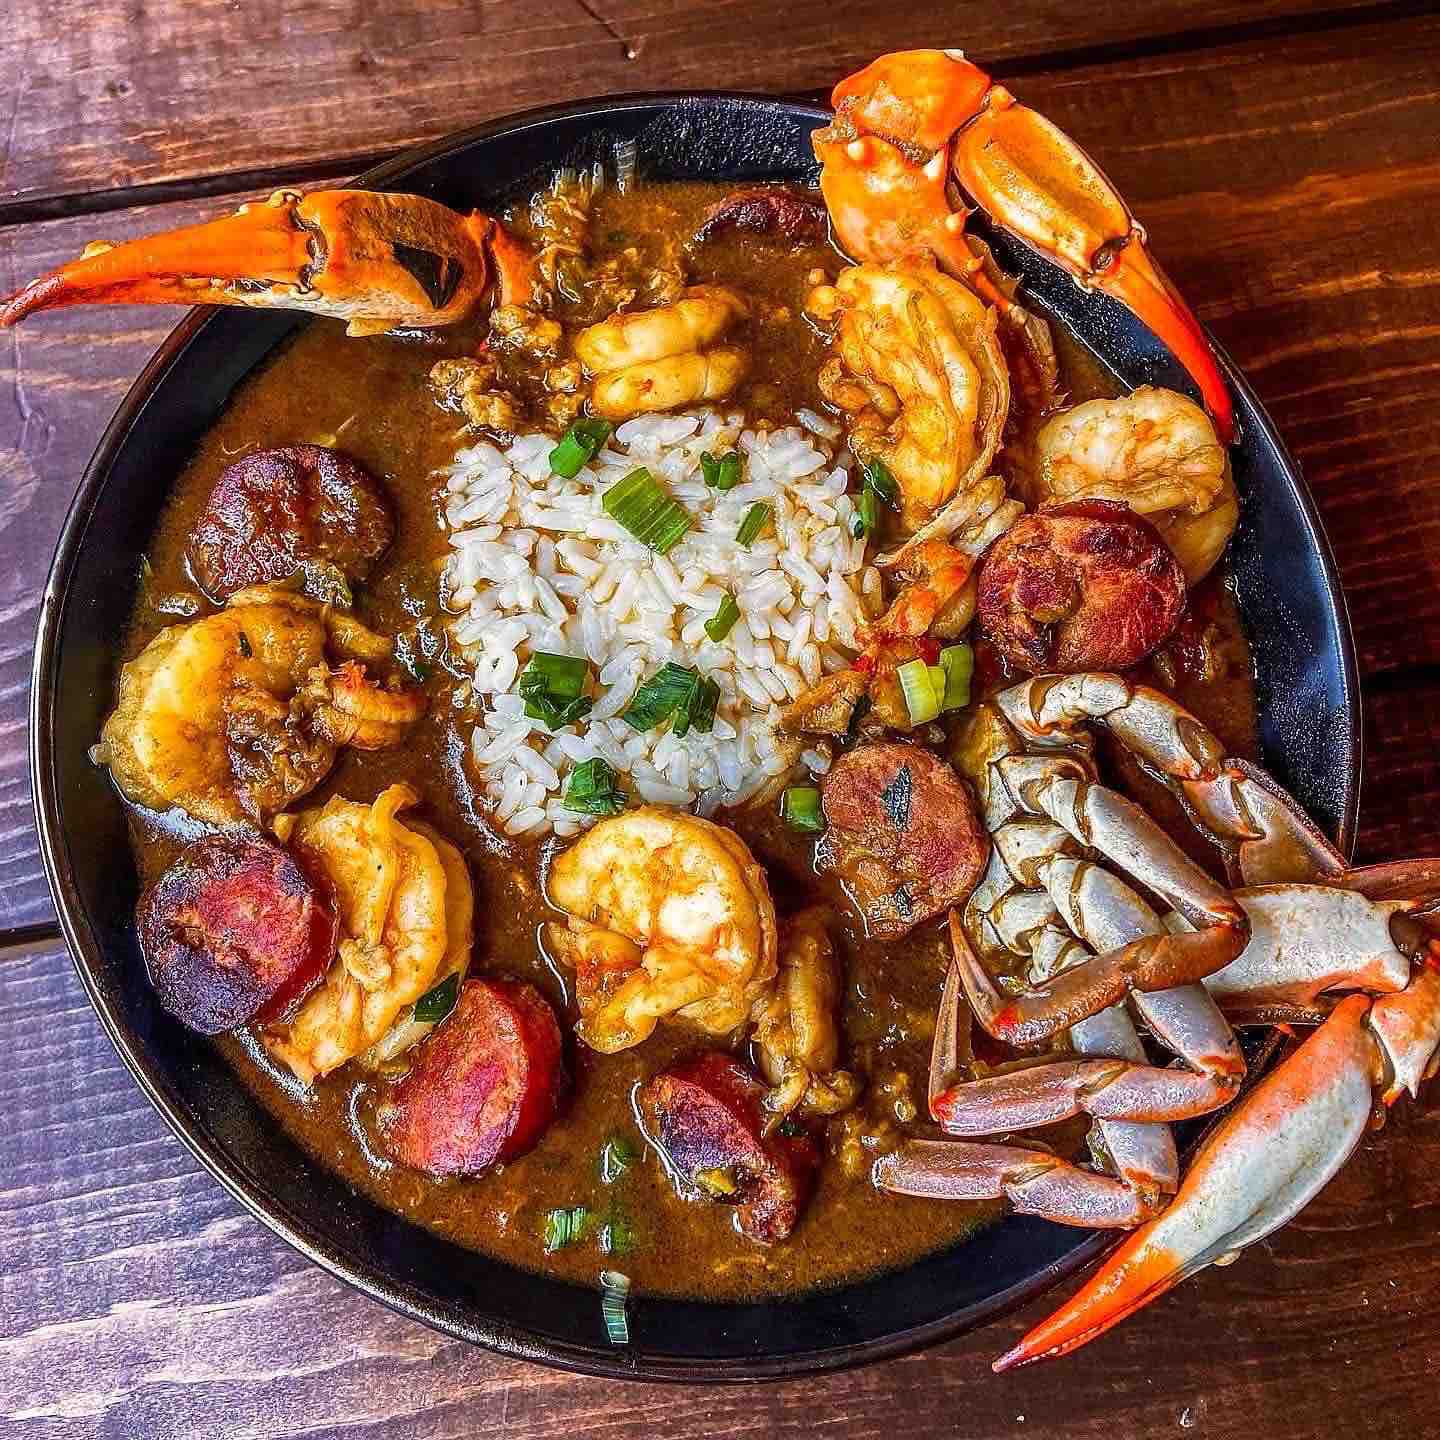 New Orleans gumbo food and faith pilgrimage tour